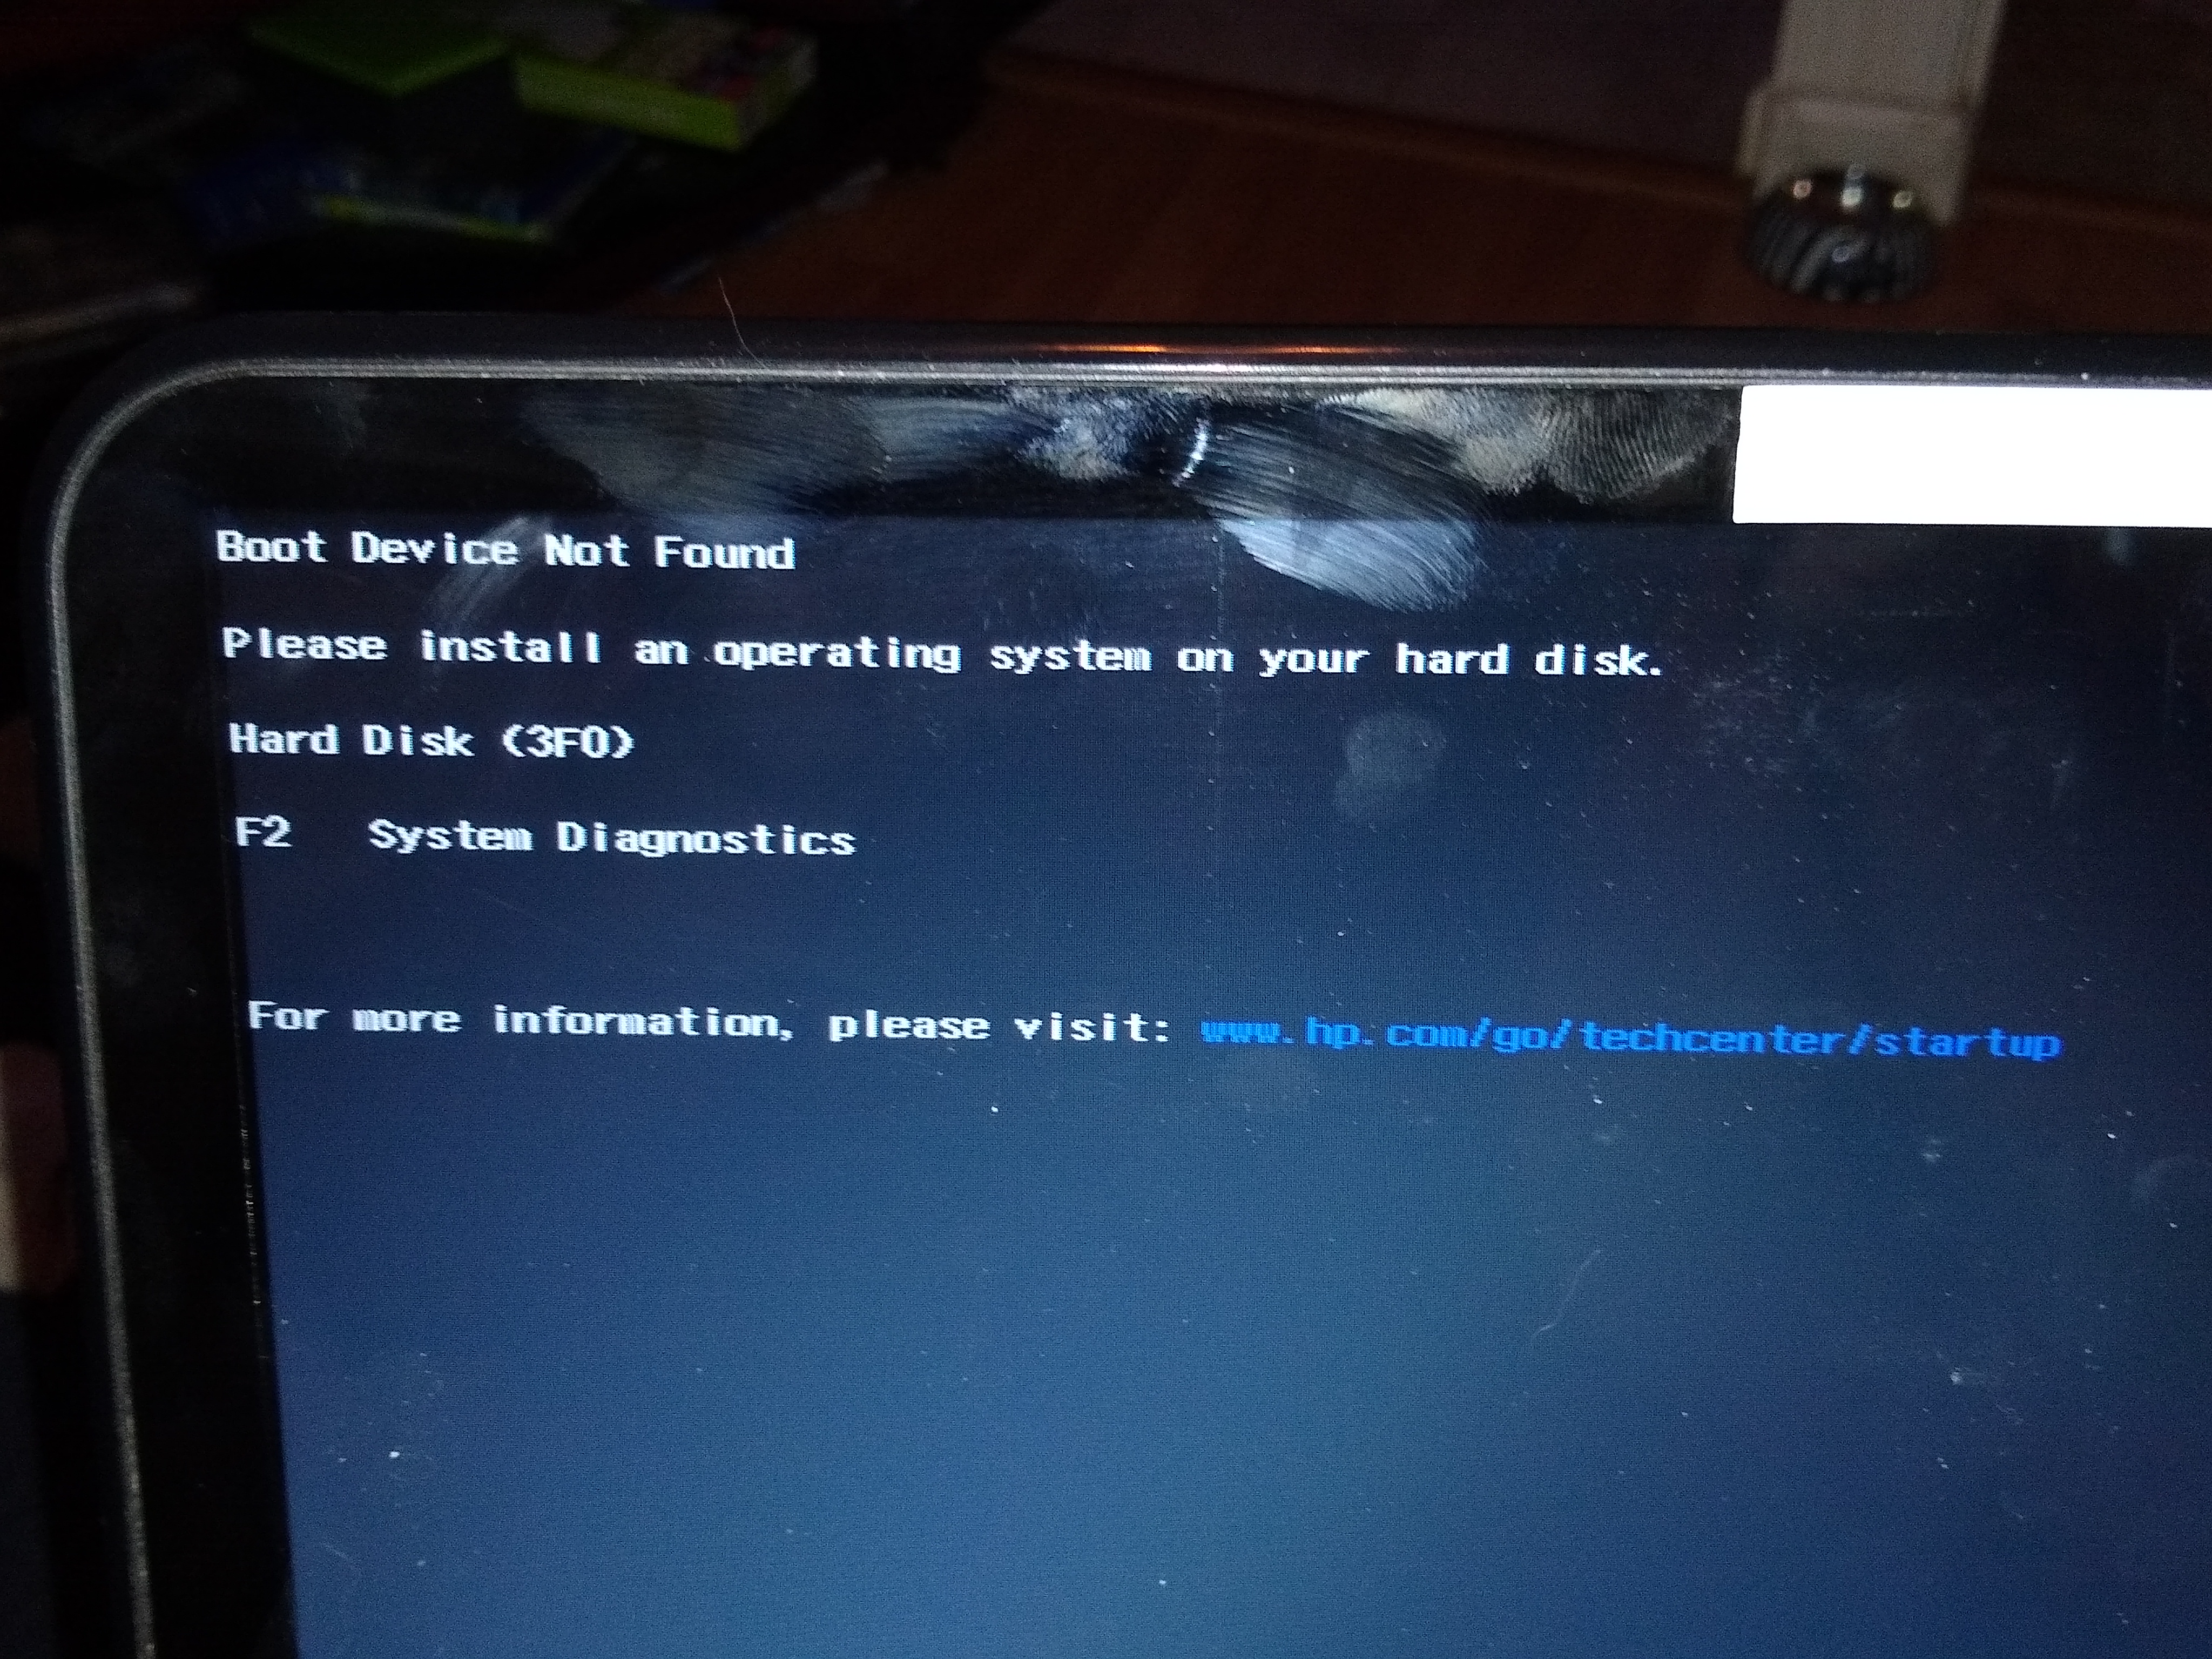 Boot device not found... Hard disk 3f0 error - HP Support Community -  7000455